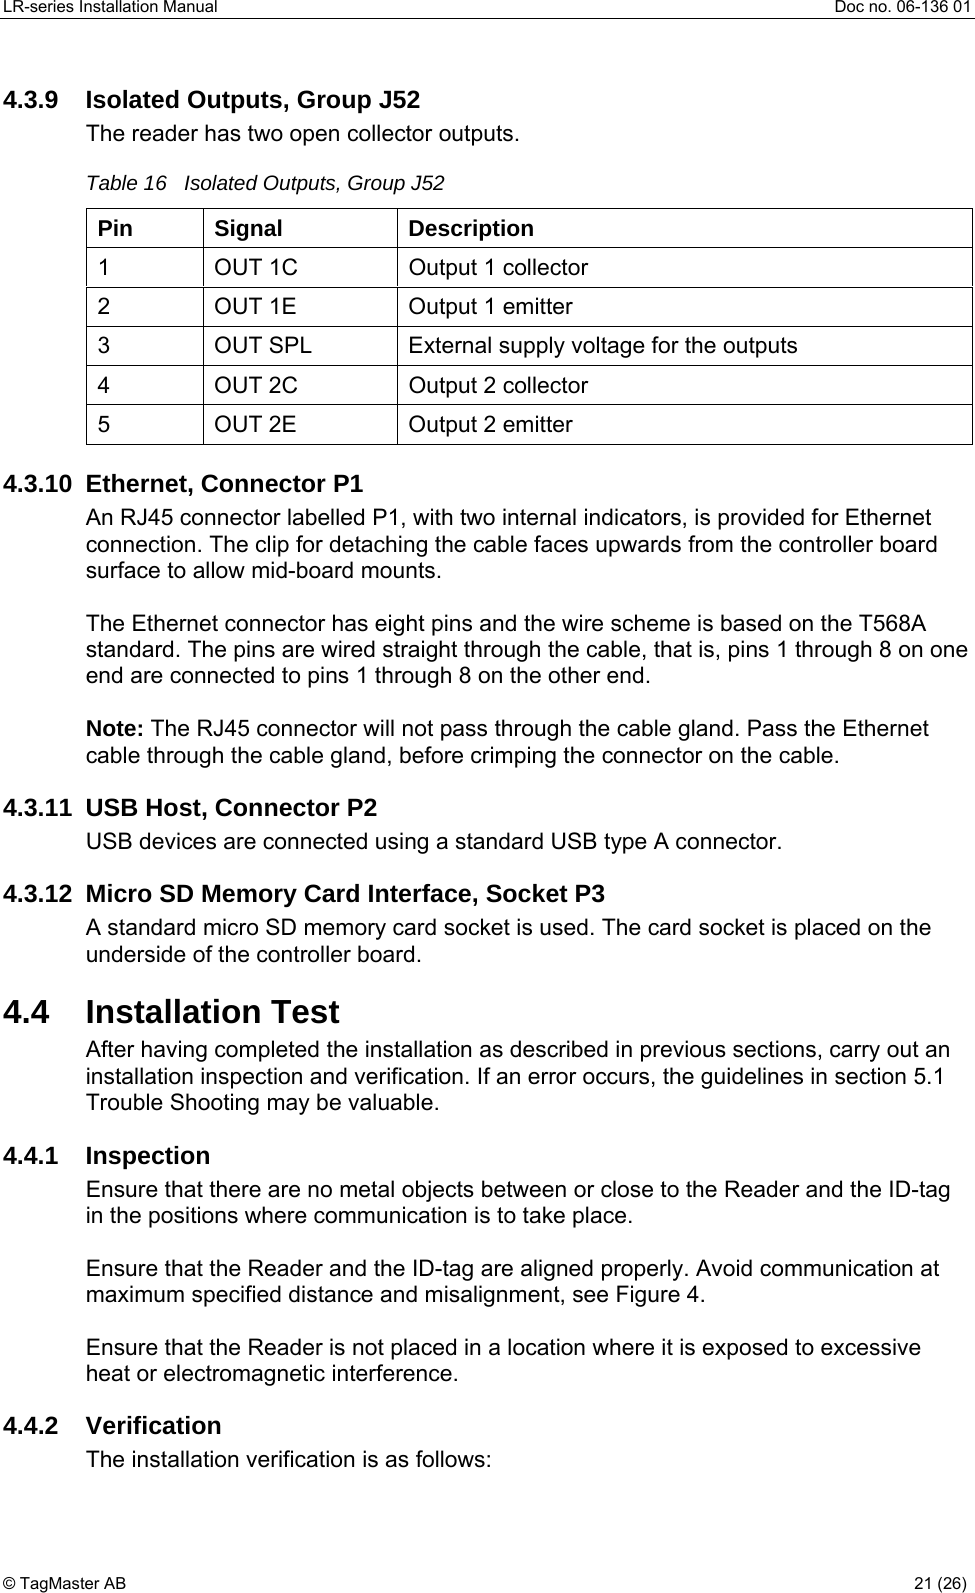 LR-series Installation Manual  Doc no. 06-136 01 4.3.9  Isolated Outputs, Group J52 The reader has two open collector outputs. Table 16   Isolated Outputs, Group J52 Pin Signal  Description 1  OUT 1C  Output 1 collector 2  OUT 1E  Output 1 emitter 3  OUT SPL  External supply voltage for the outputs 4  OUT 2C  Output 2 collector 5  OUT 2E  Output 2 emitter 4.3.10 Ethernet, Connector P1 An RJ45 connector labelled P1, with two internal indicators, is provided for Ethernet connection. The clip for detaching the cable faces upwards from the controller board surface to allow mid-board mounts.   The Ethernet connector has eight pins and the wire scheme is based on the T568A standard. The pins are wired straight through the cable, that is, pins 1 through 8 on one end are connected to pins 1 through 8 on the other end.  Note: The RJ45 connector will not pass through the cable gland. Pass the Ethernet cable through the cable gland, before crimping the connector on the cable. 4.3.11  USB Host, Connector P2 USB devices are connected using a standard USB type A connector.  4.3.12  Micro SD Memory Card Interface, Socket P3 A standard micro SD memory card socket is used. The card socket is placed on the underside of the controller board.  4.4 Installation Test After having completed the installation as described in previous sections, carry out an installation inspection and verification. If an error occurs, the guidelines in section 5.1 Trouble Shooting may be valuable. 4.4.1 Inspection Ensure that there are no metal objects between or close to the Reader and the ID-tag in the positions where communication is to take place.  Ensure that the Reader and the ID-tag are aligned properly. Avoid communication at maximum specified distance and misalignment, see Figure 4.  Ensure that the Reader is not placed in a location where it is exposed to excessive heat or electromagnetic interference.     4.4.2  Verification   The installation verification is as follows:  © TagMaster AB  21 (26)   